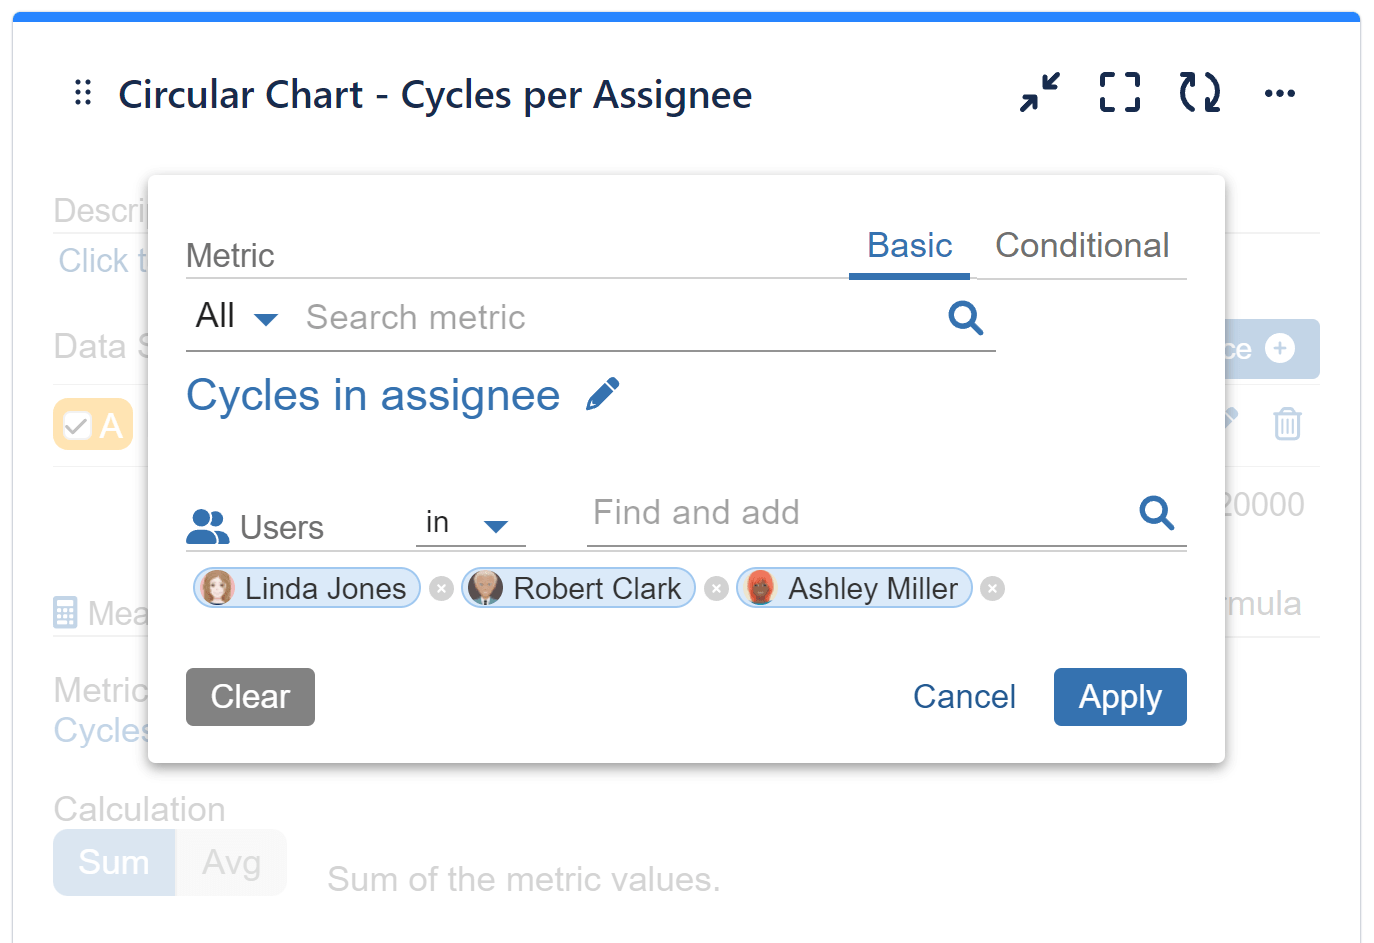 Cycles in assignee metric